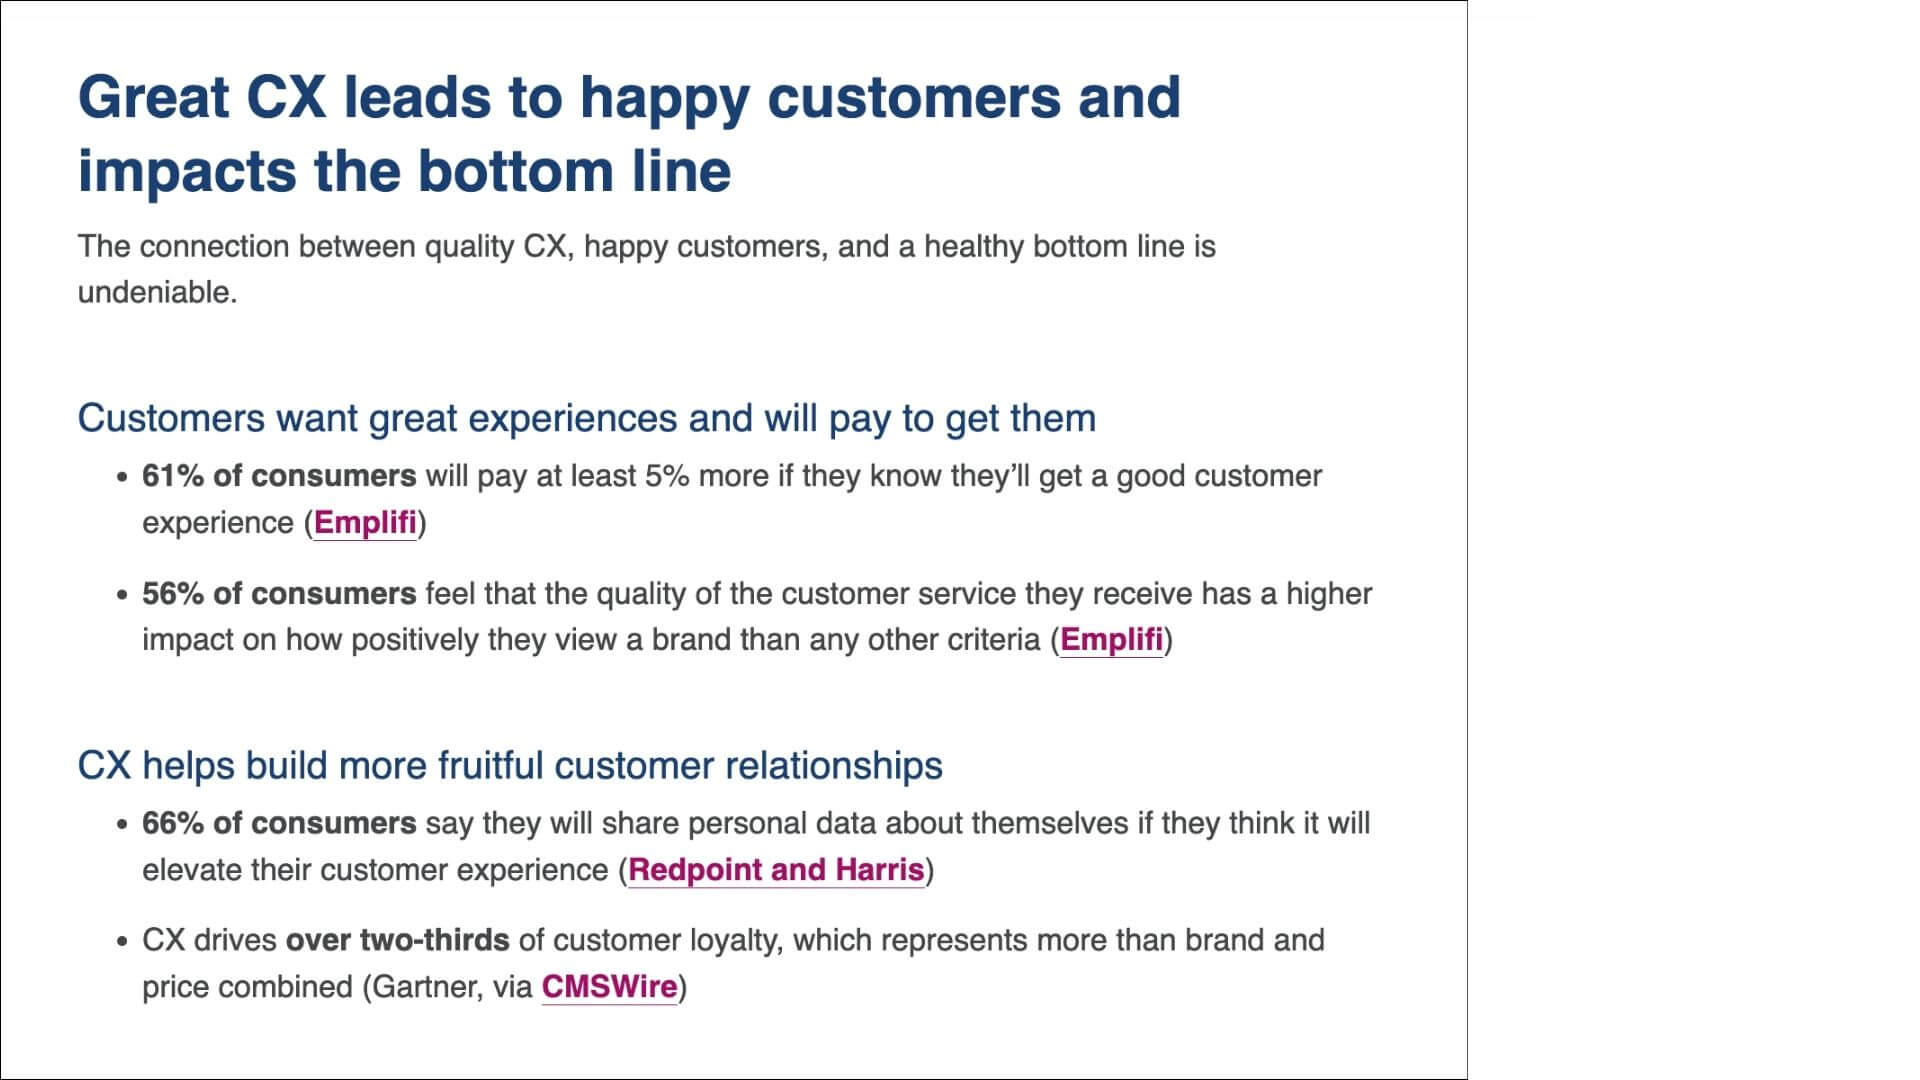 Stats on how customers pay more for great experiences